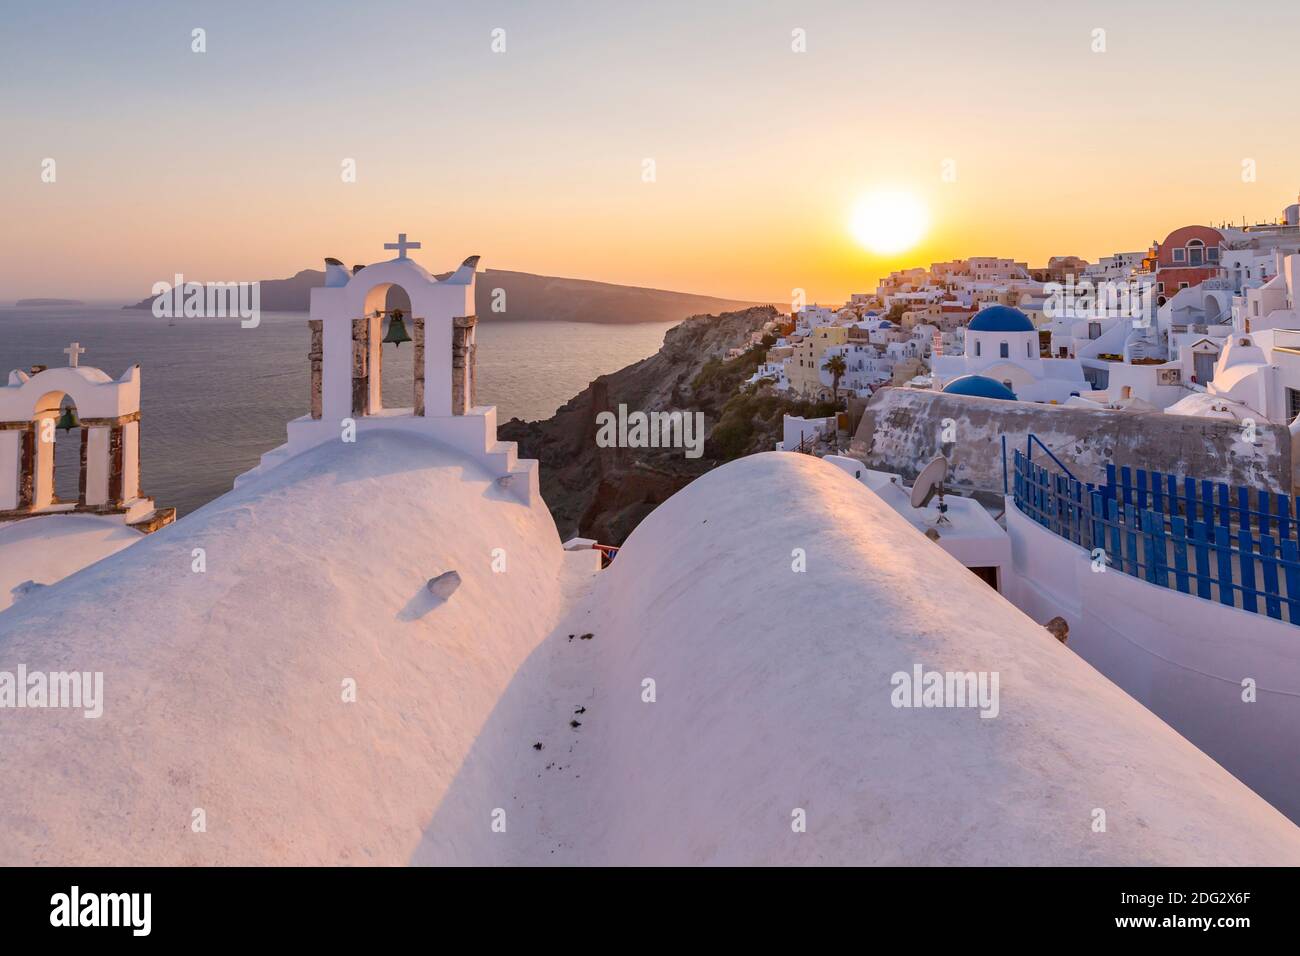 View of traditional blue domed churches and white houses at sunset in Oia, Santorini, Greek Islands, Greece, Europe Stock Photo